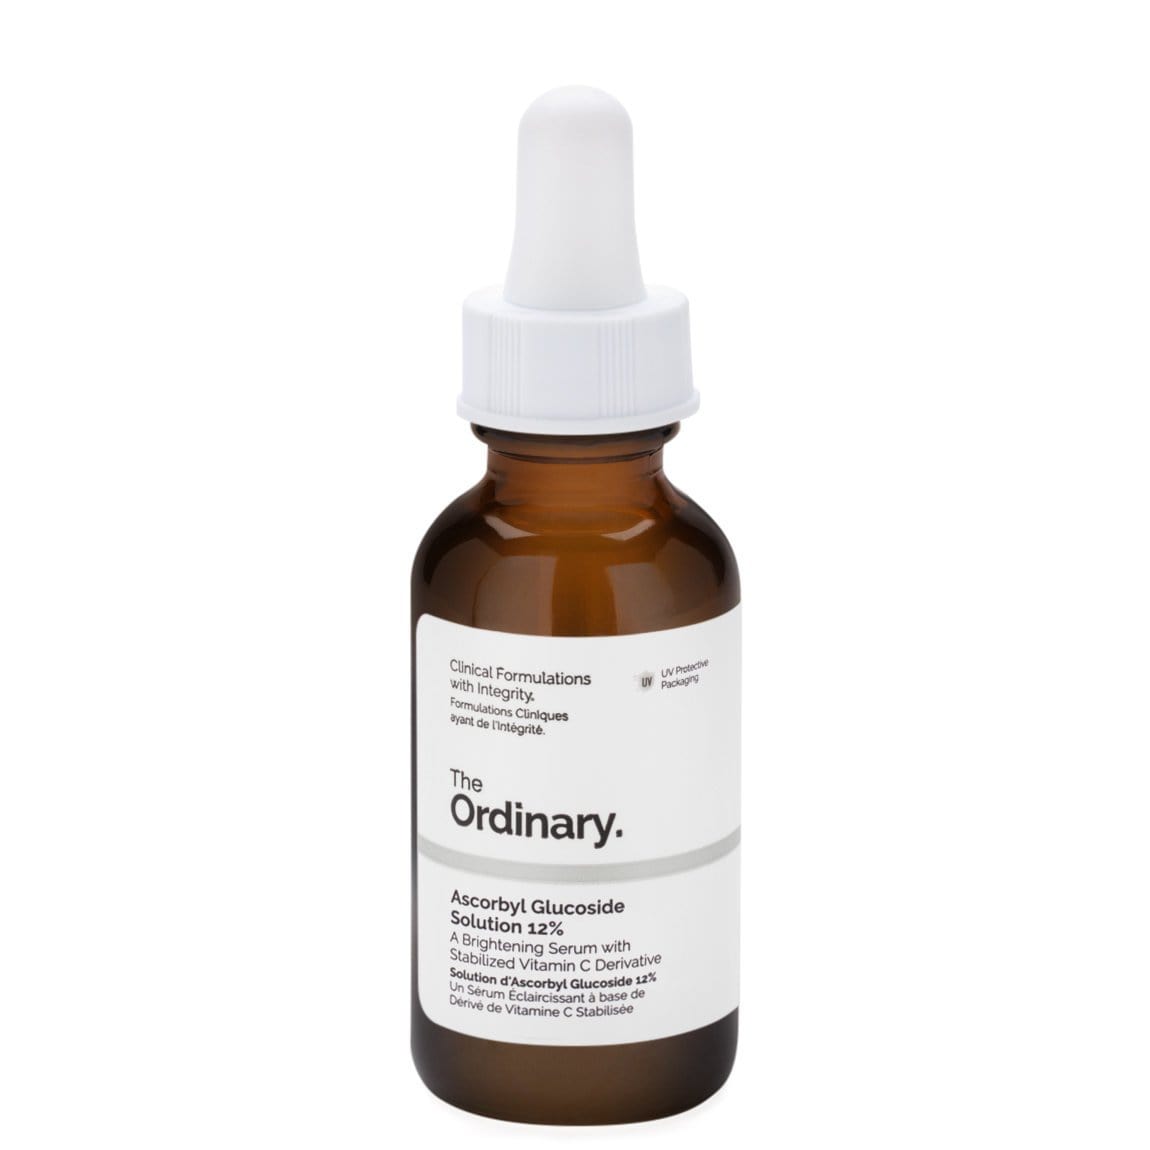 The Ordinary - Solution d'Ascorbyl glucocide 12% - 30ml - The Ordinary - Ethni Beauty Market